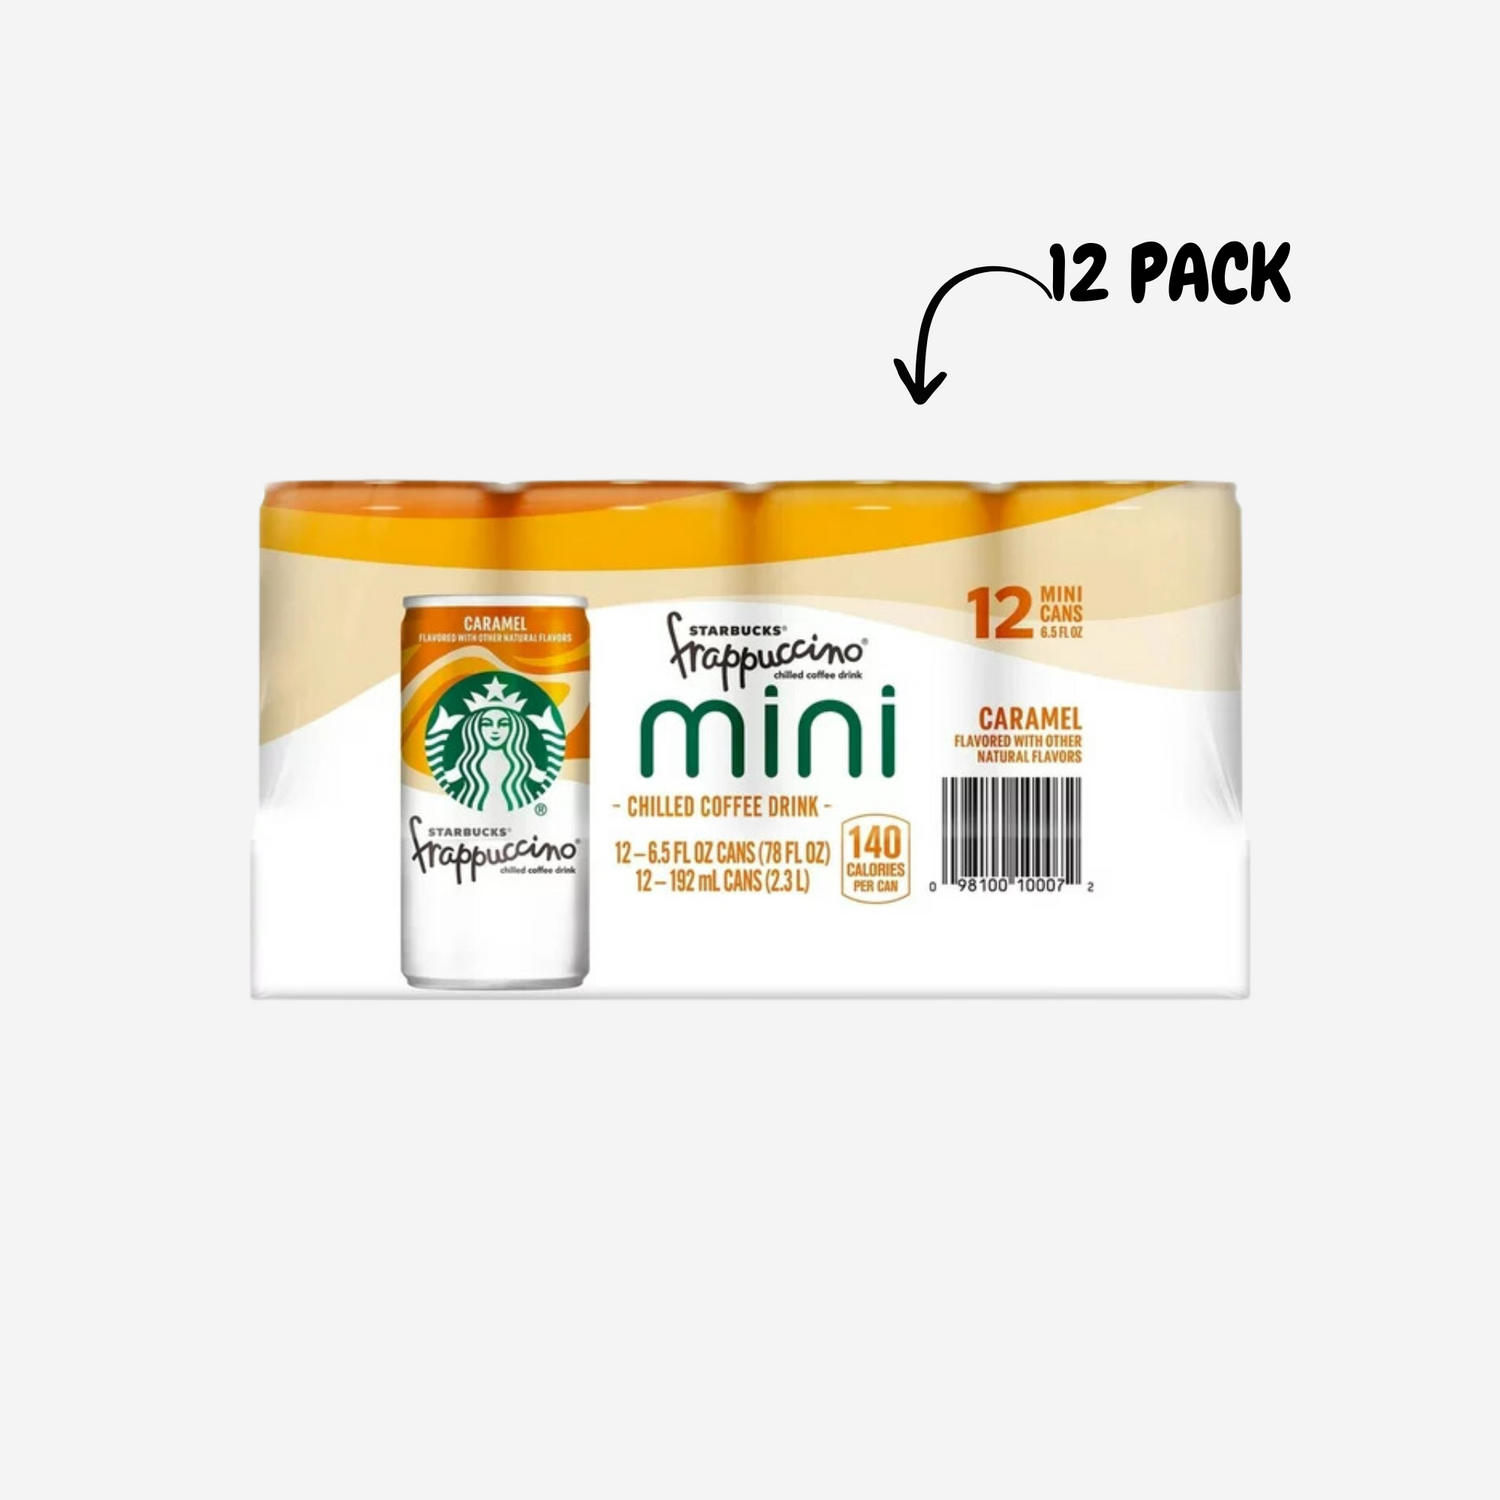 Starbucks Frappuccino Caramel Mini Coffee Drink, 6.5 Fluid Ounce (Pack of 12)